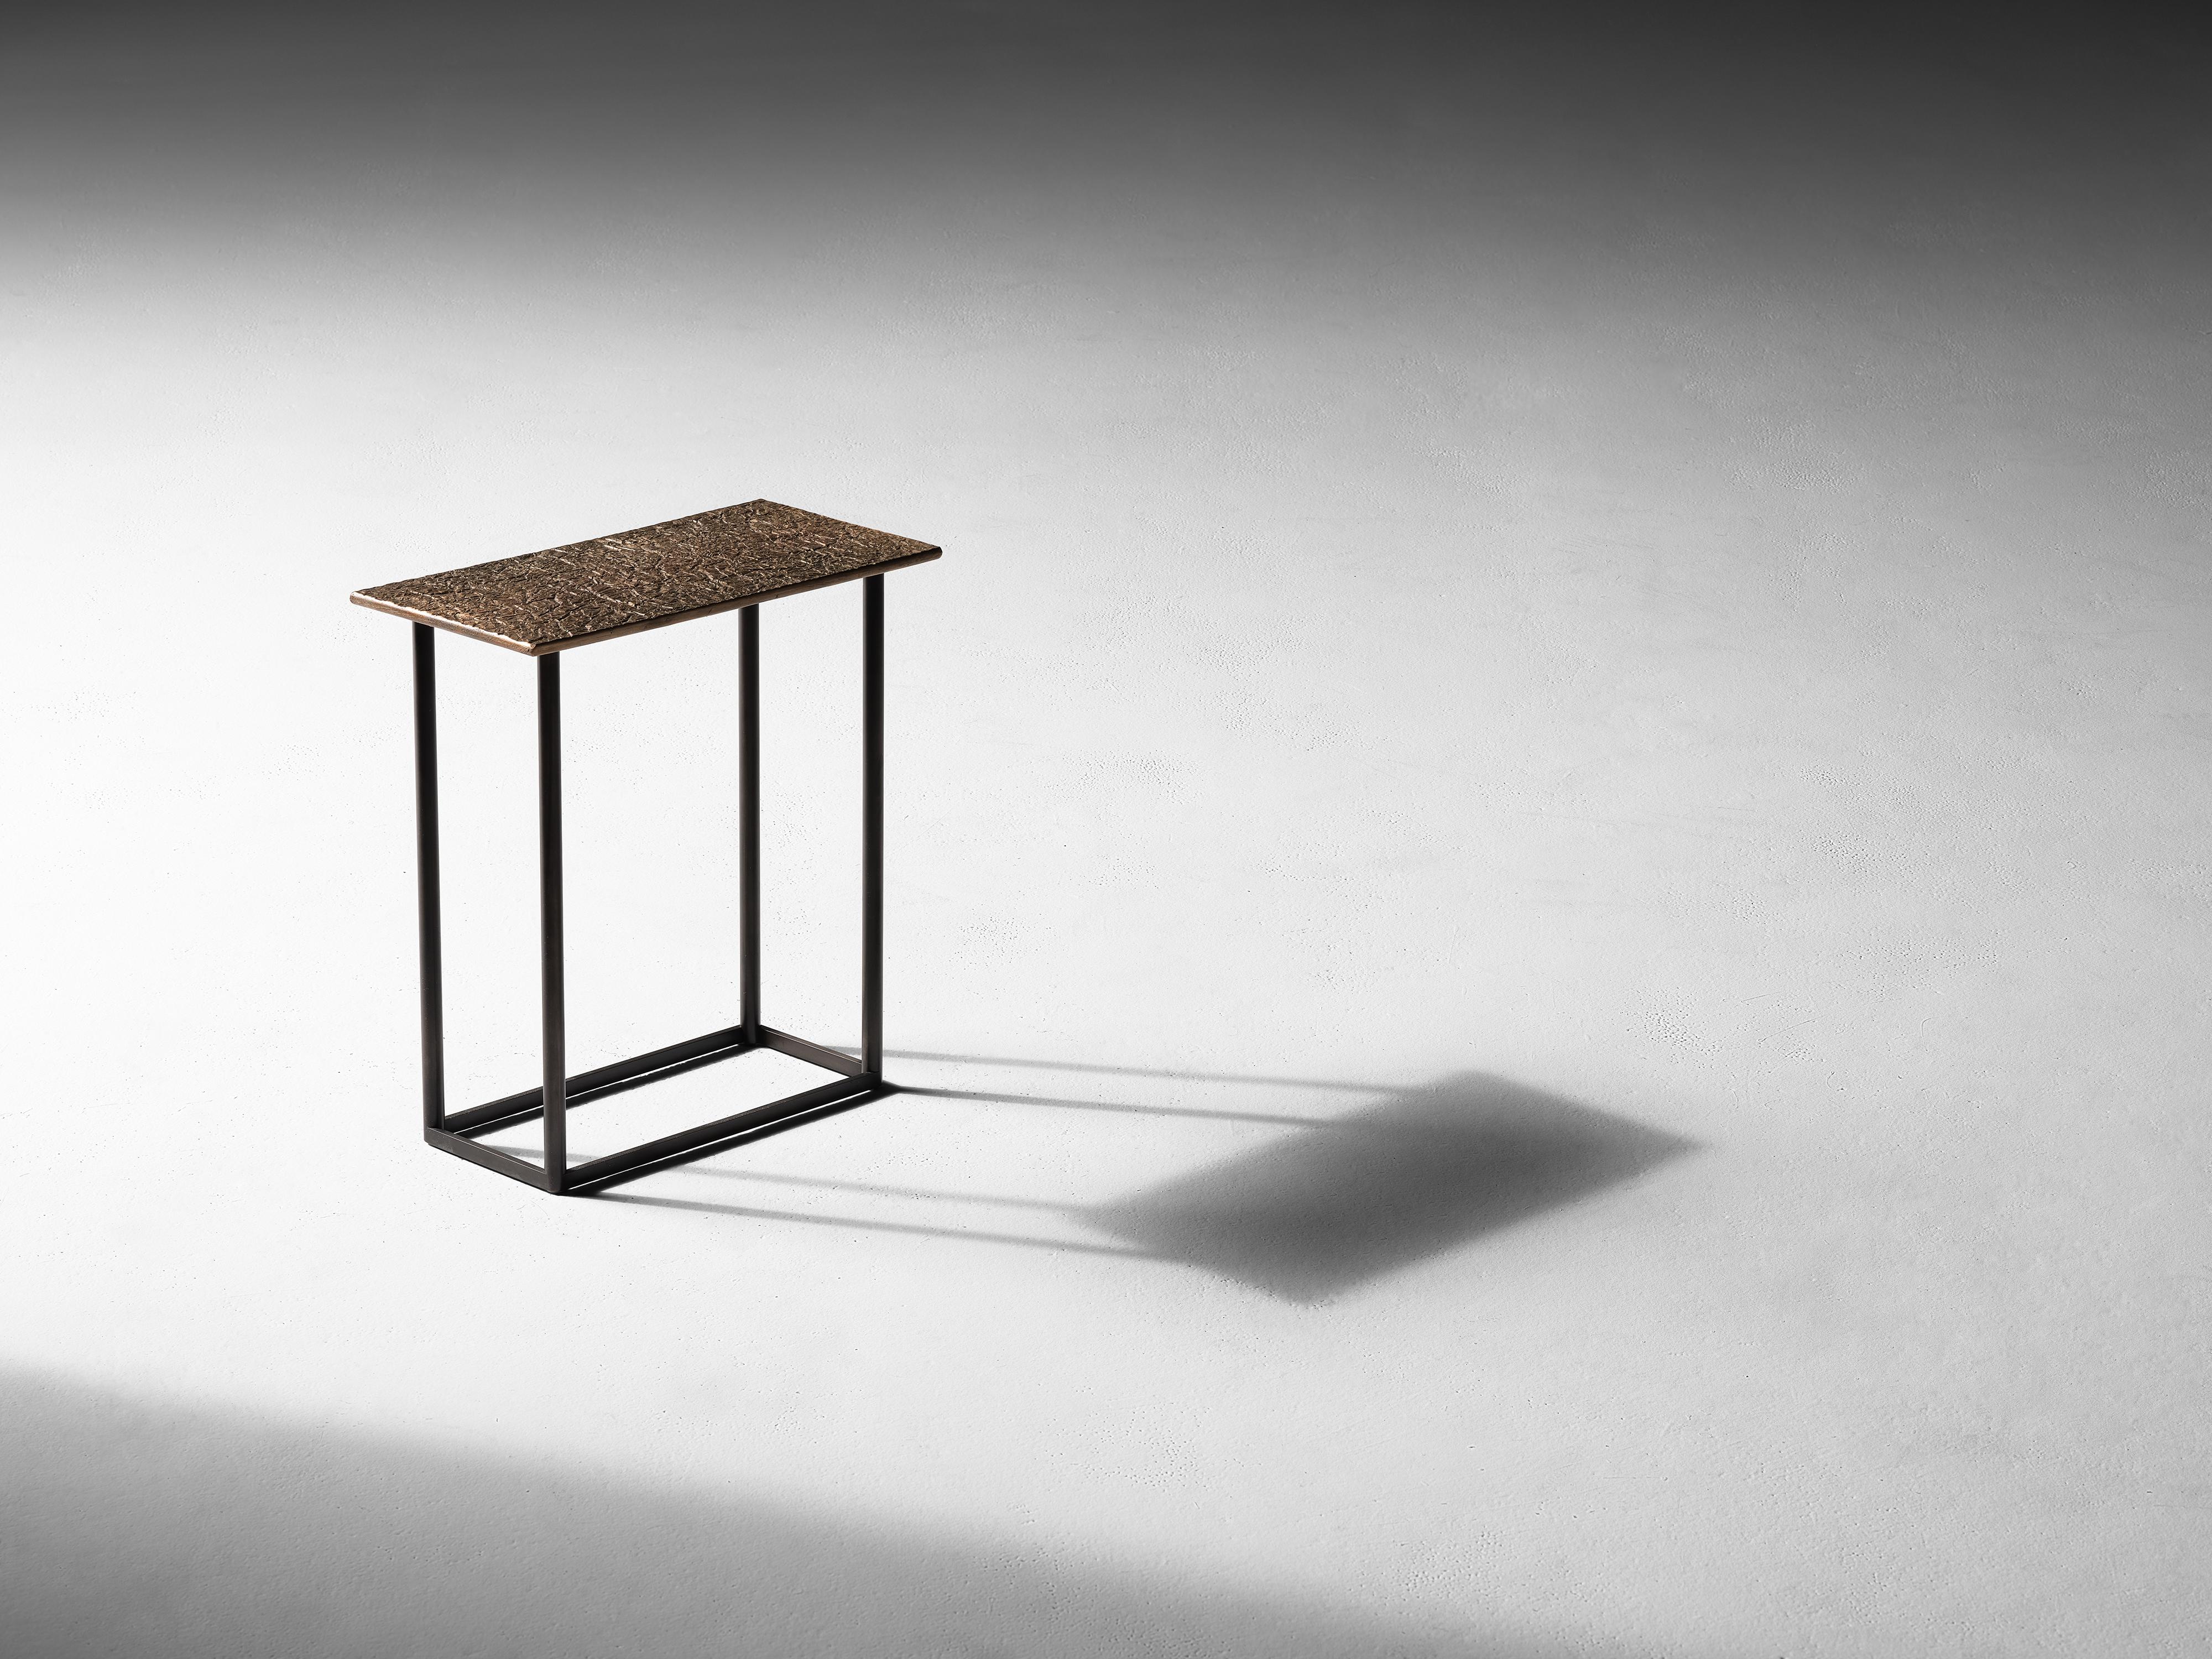 Created in collaboration with Nick Alan King.

This geometric side table, an industrial arrangement of right angles in bronze and cold blackened steel, is adorned by a playful top reminiscent of a section of parched earth.

Drawing from his